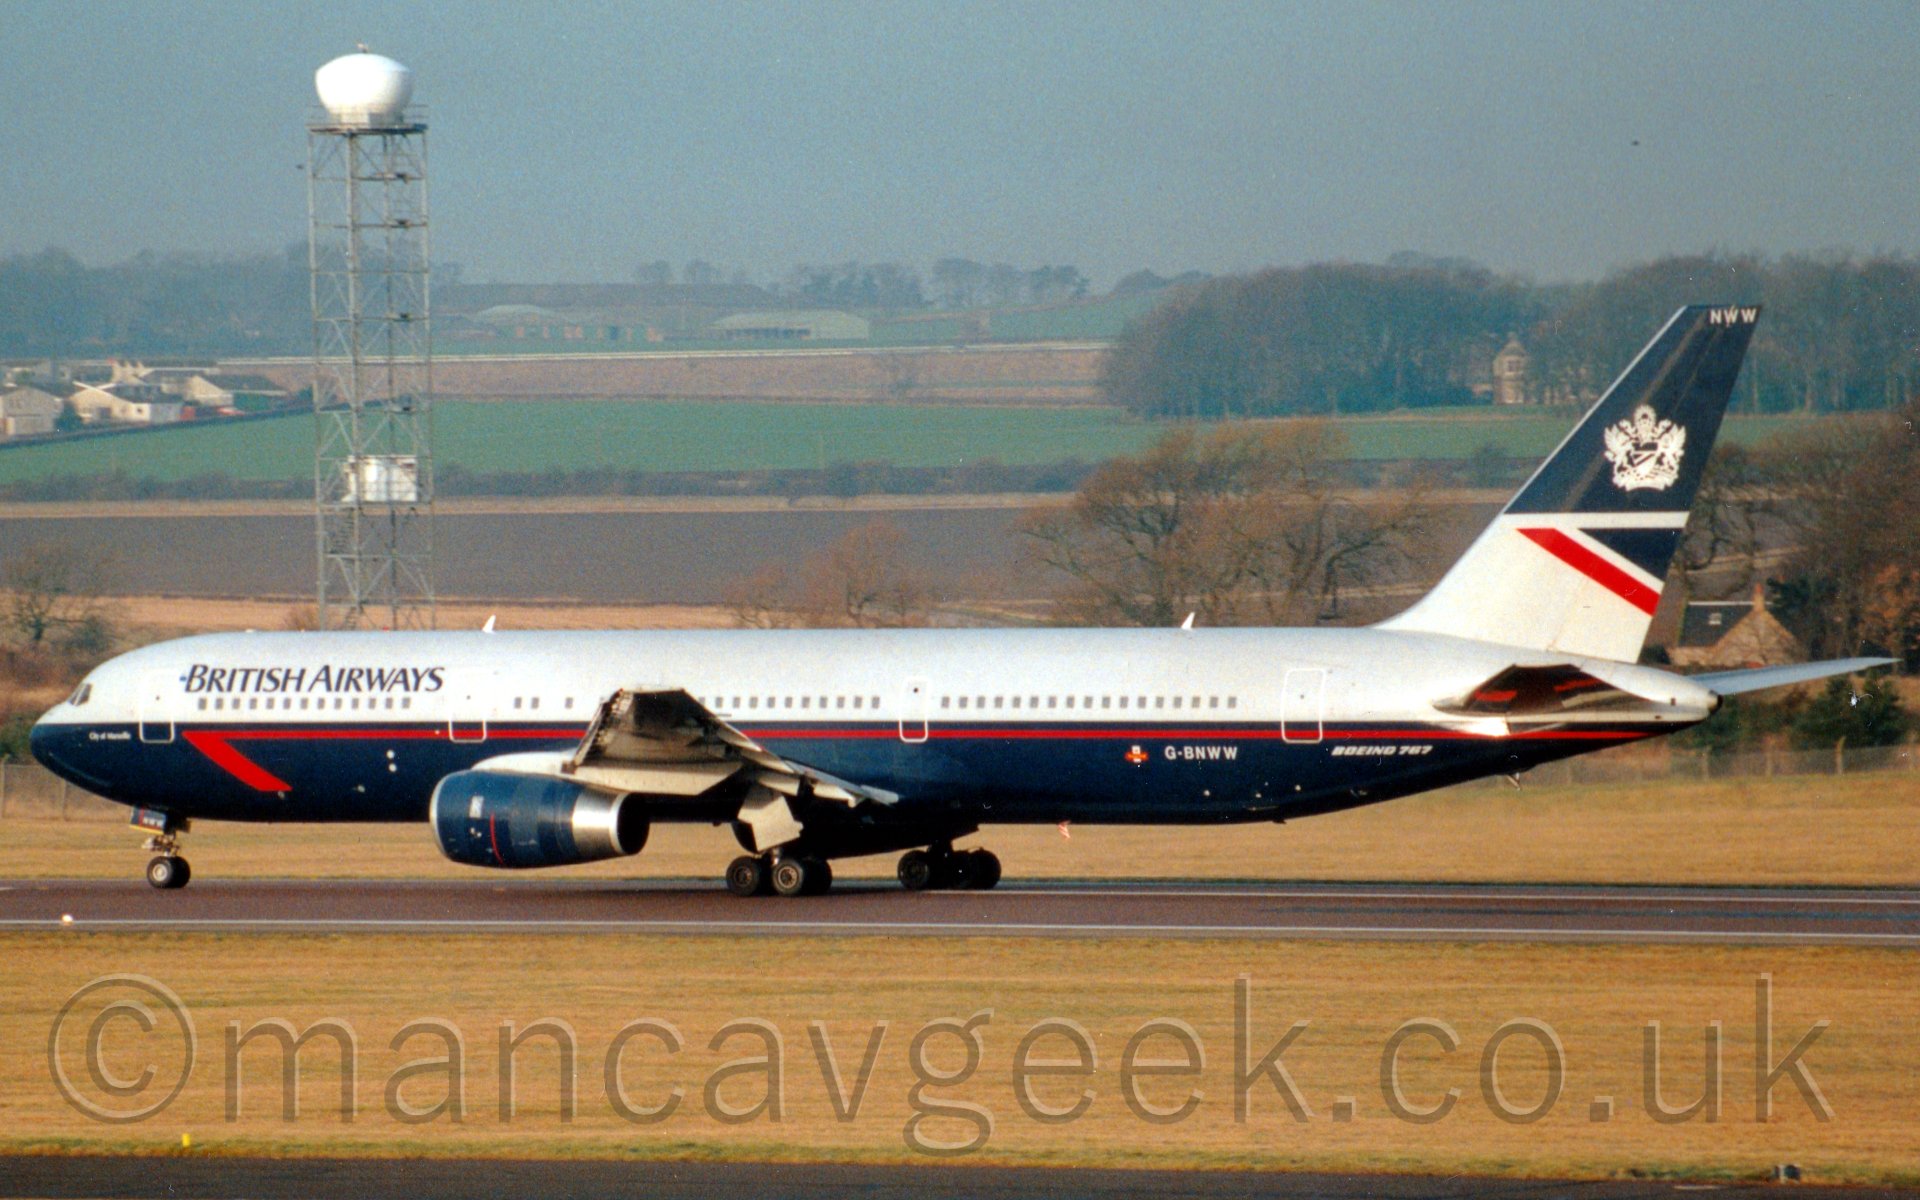 Side view of a twin engined jet airliner running along a runway from right to left at high speed during it's take off run. The planes body has a dark blue belly with a thin red stripe, while the upper half is grey, with dark blue "British Airways" titles on the upper forward fuselage. The tail has a blue top, with a promiently displayed Royal Crest, and a grey lower half, with a blue, grey, and red triangle. The front of the frame is taken up with grass, while fields lead off into the distance, giving way occasionally to trees and bushes. There is a large tank on a tall metal tower just behind the planes cockpit.